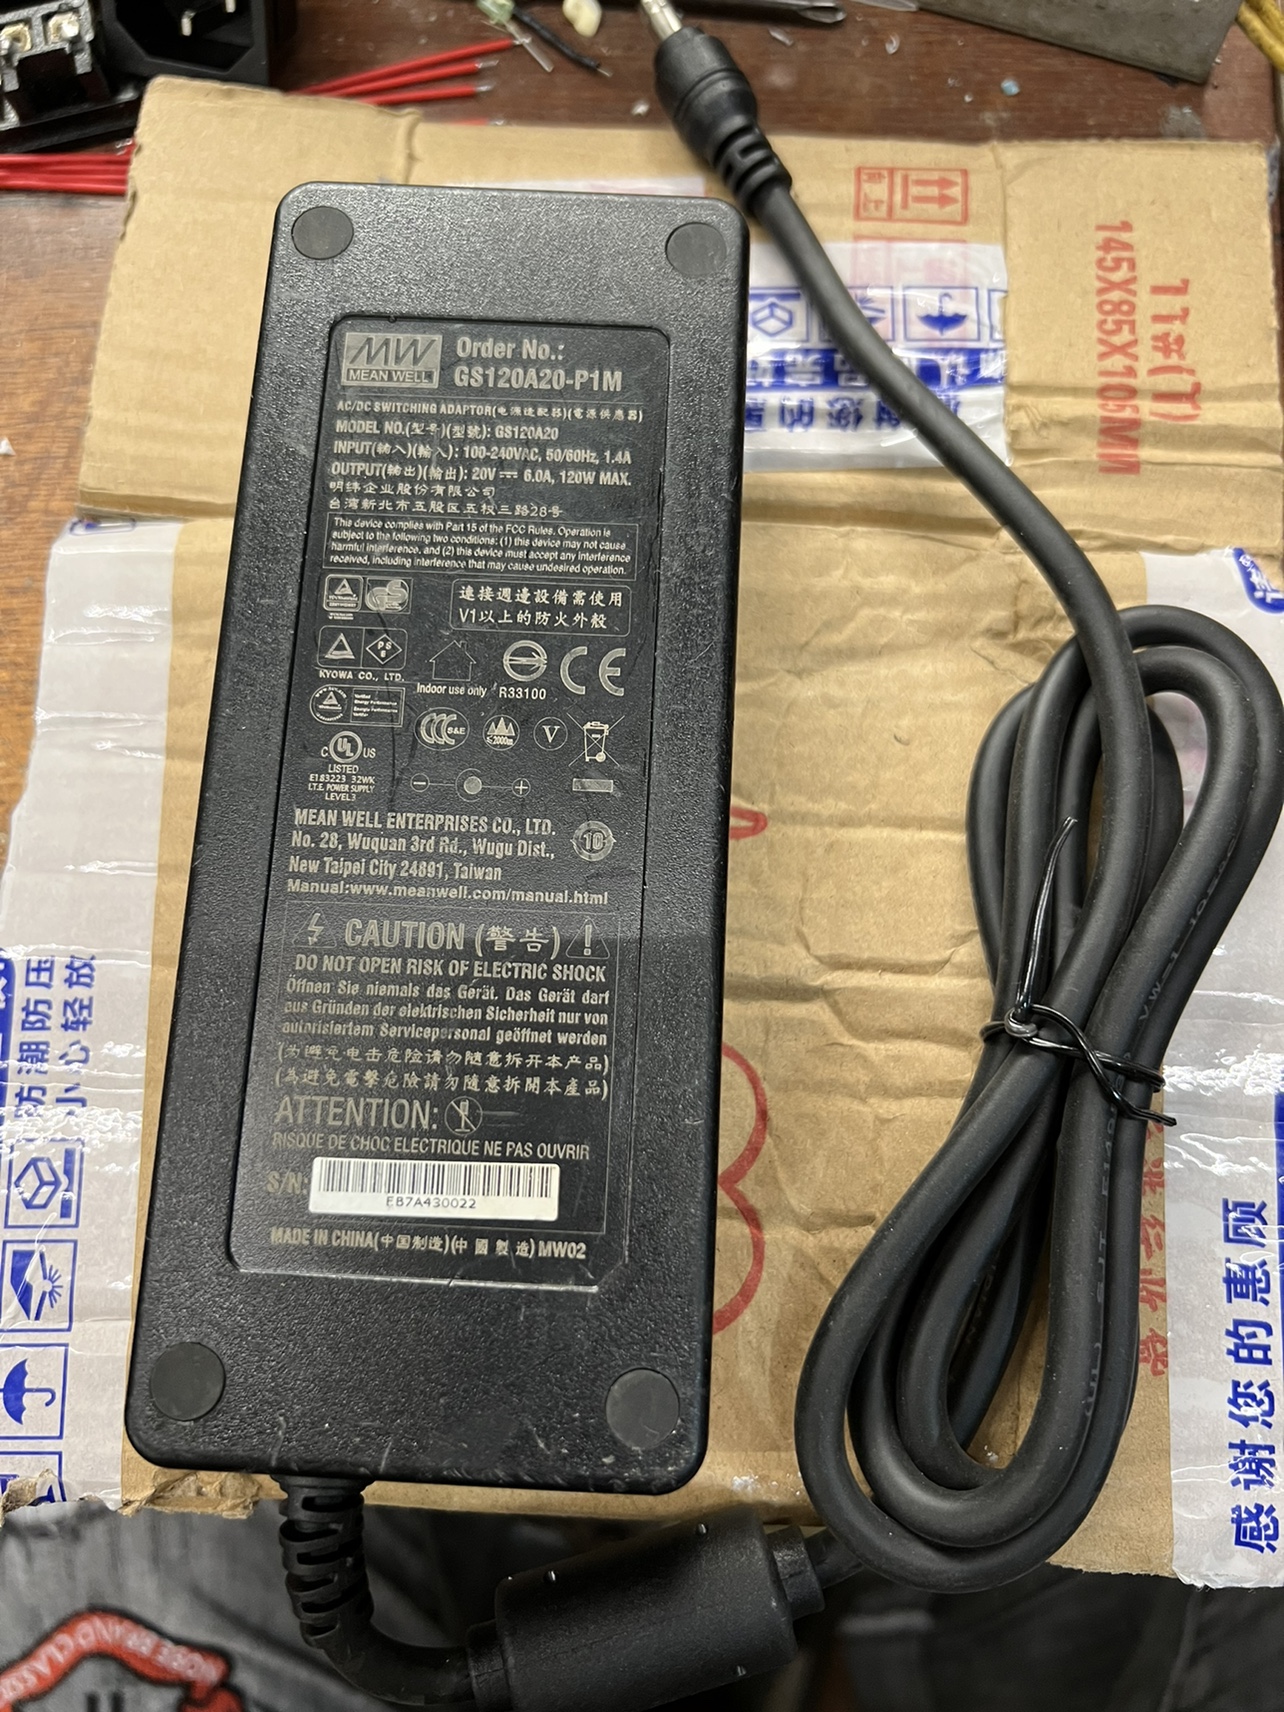 *Brand NEW* MW 20V 6A GS120A20 AC DC ADAPTER POWER SUPPLY